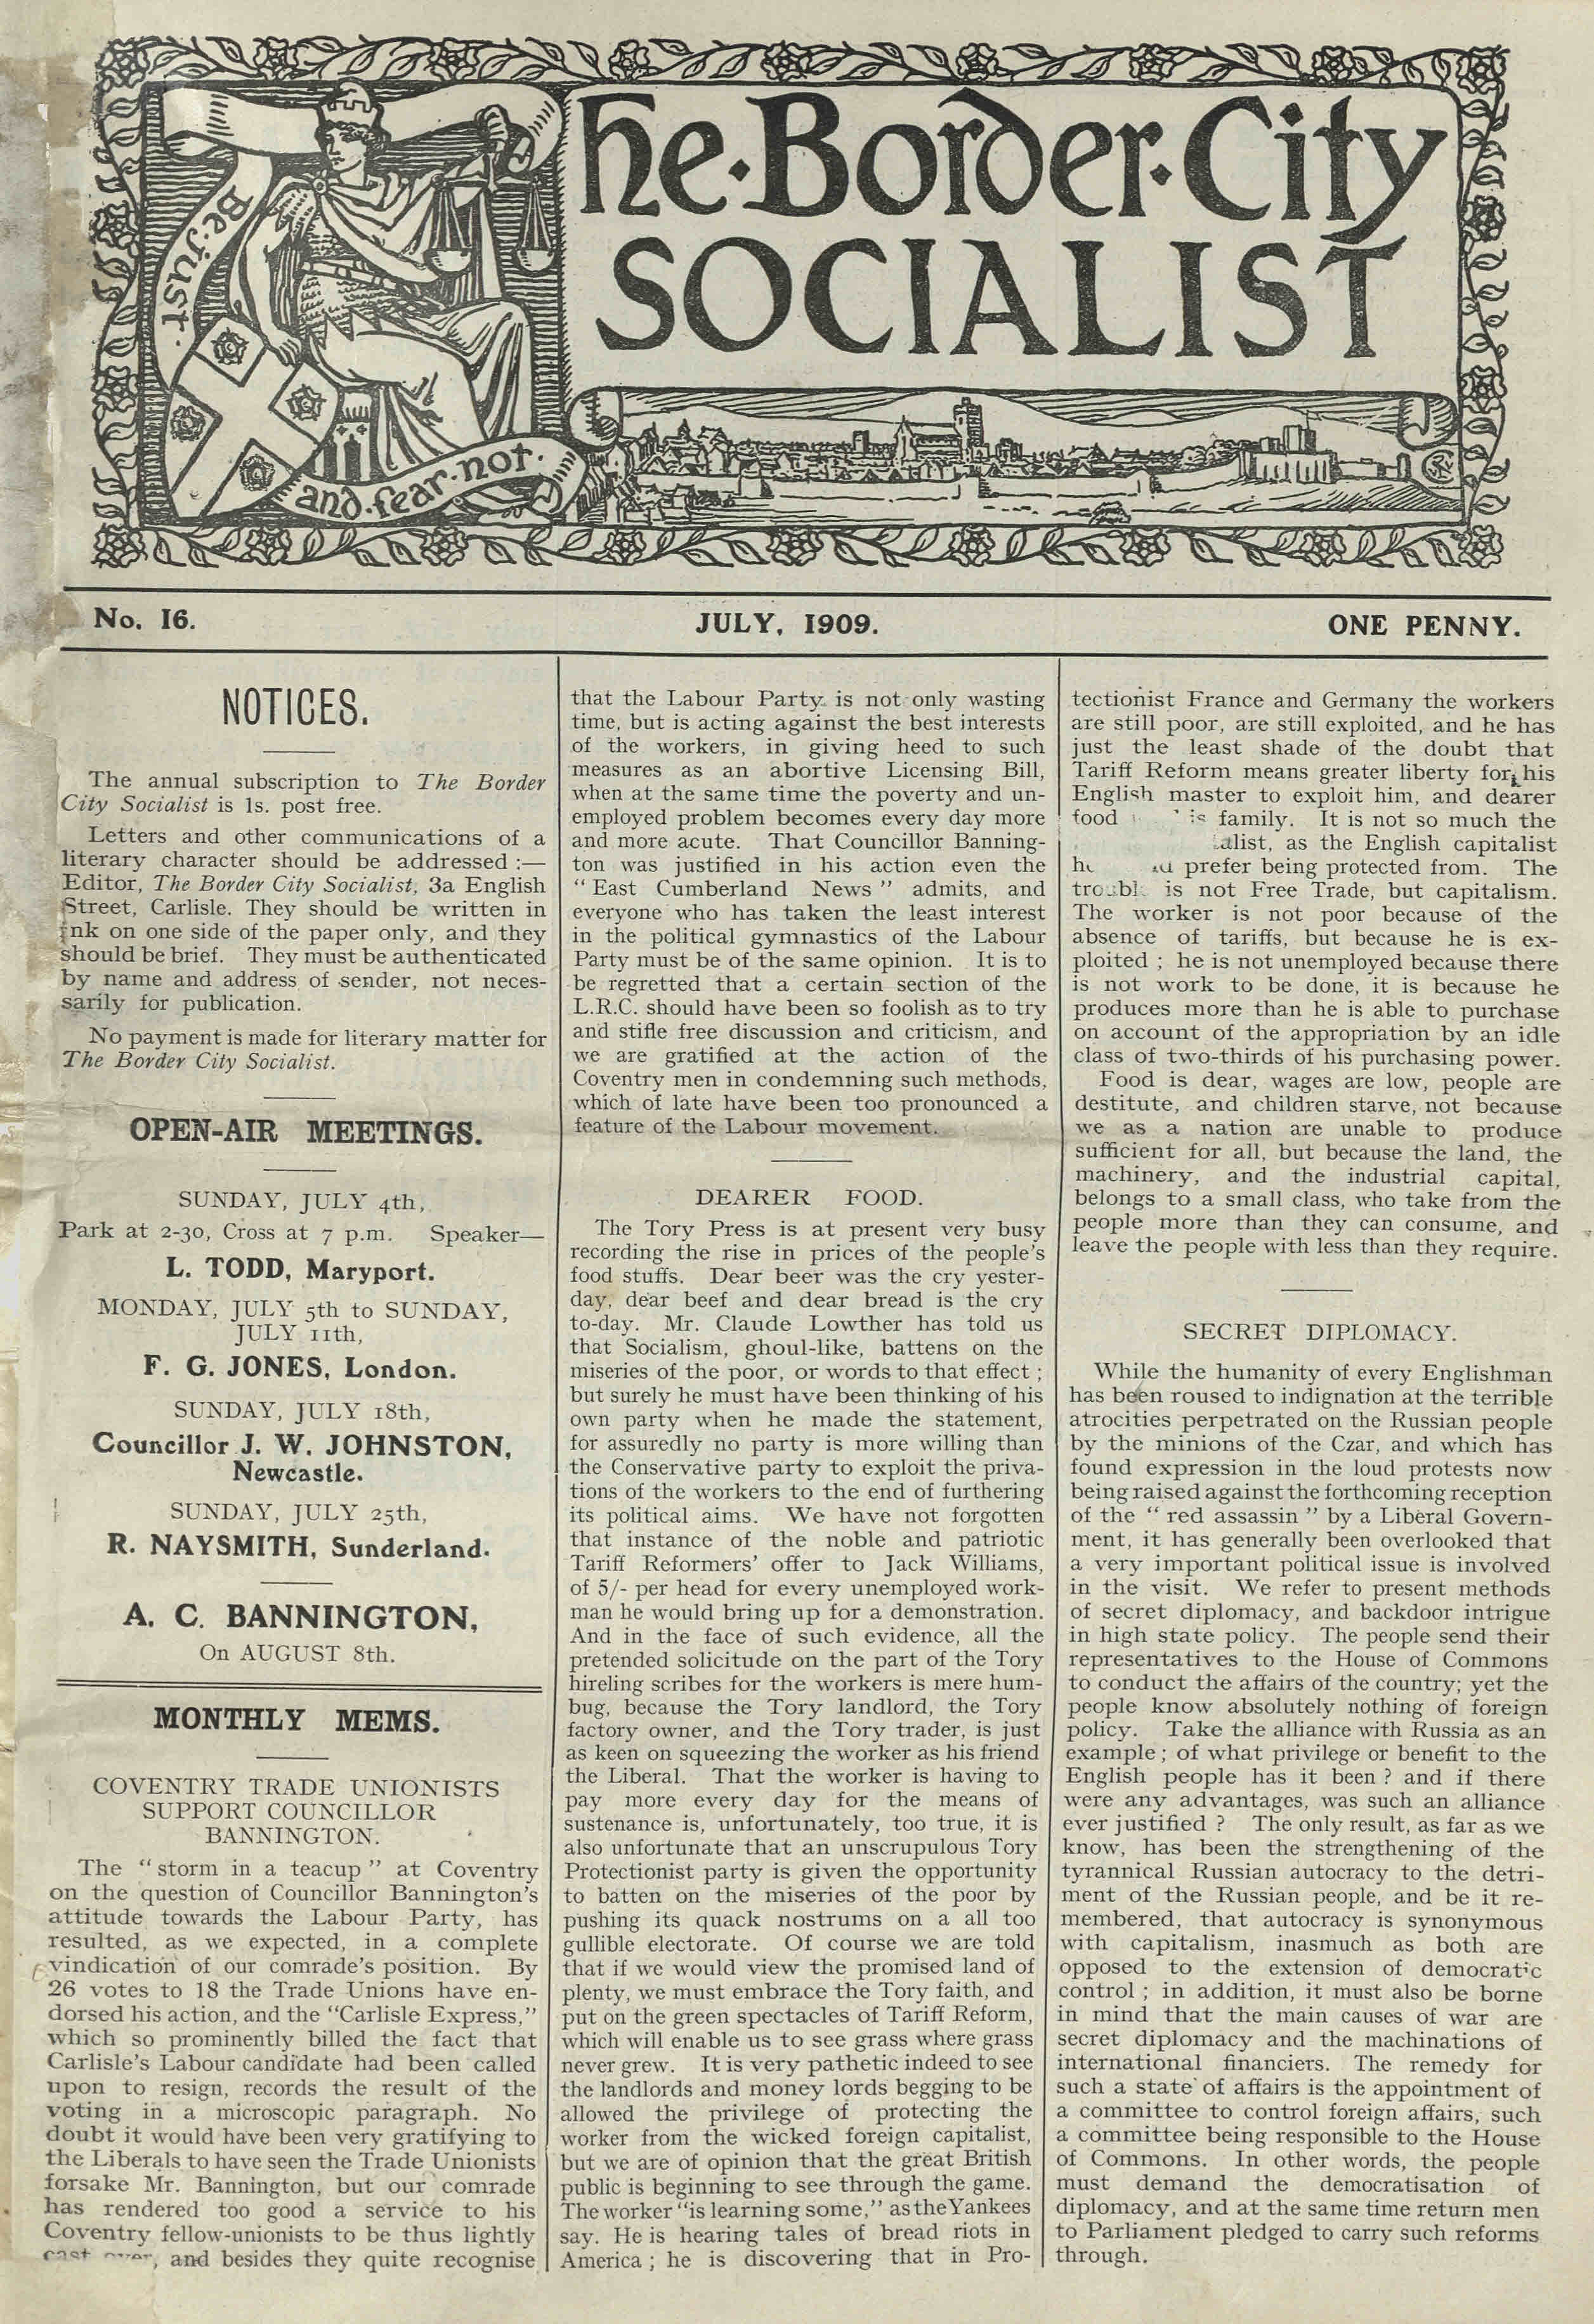 Front cover of an edition of The Border City Socialist